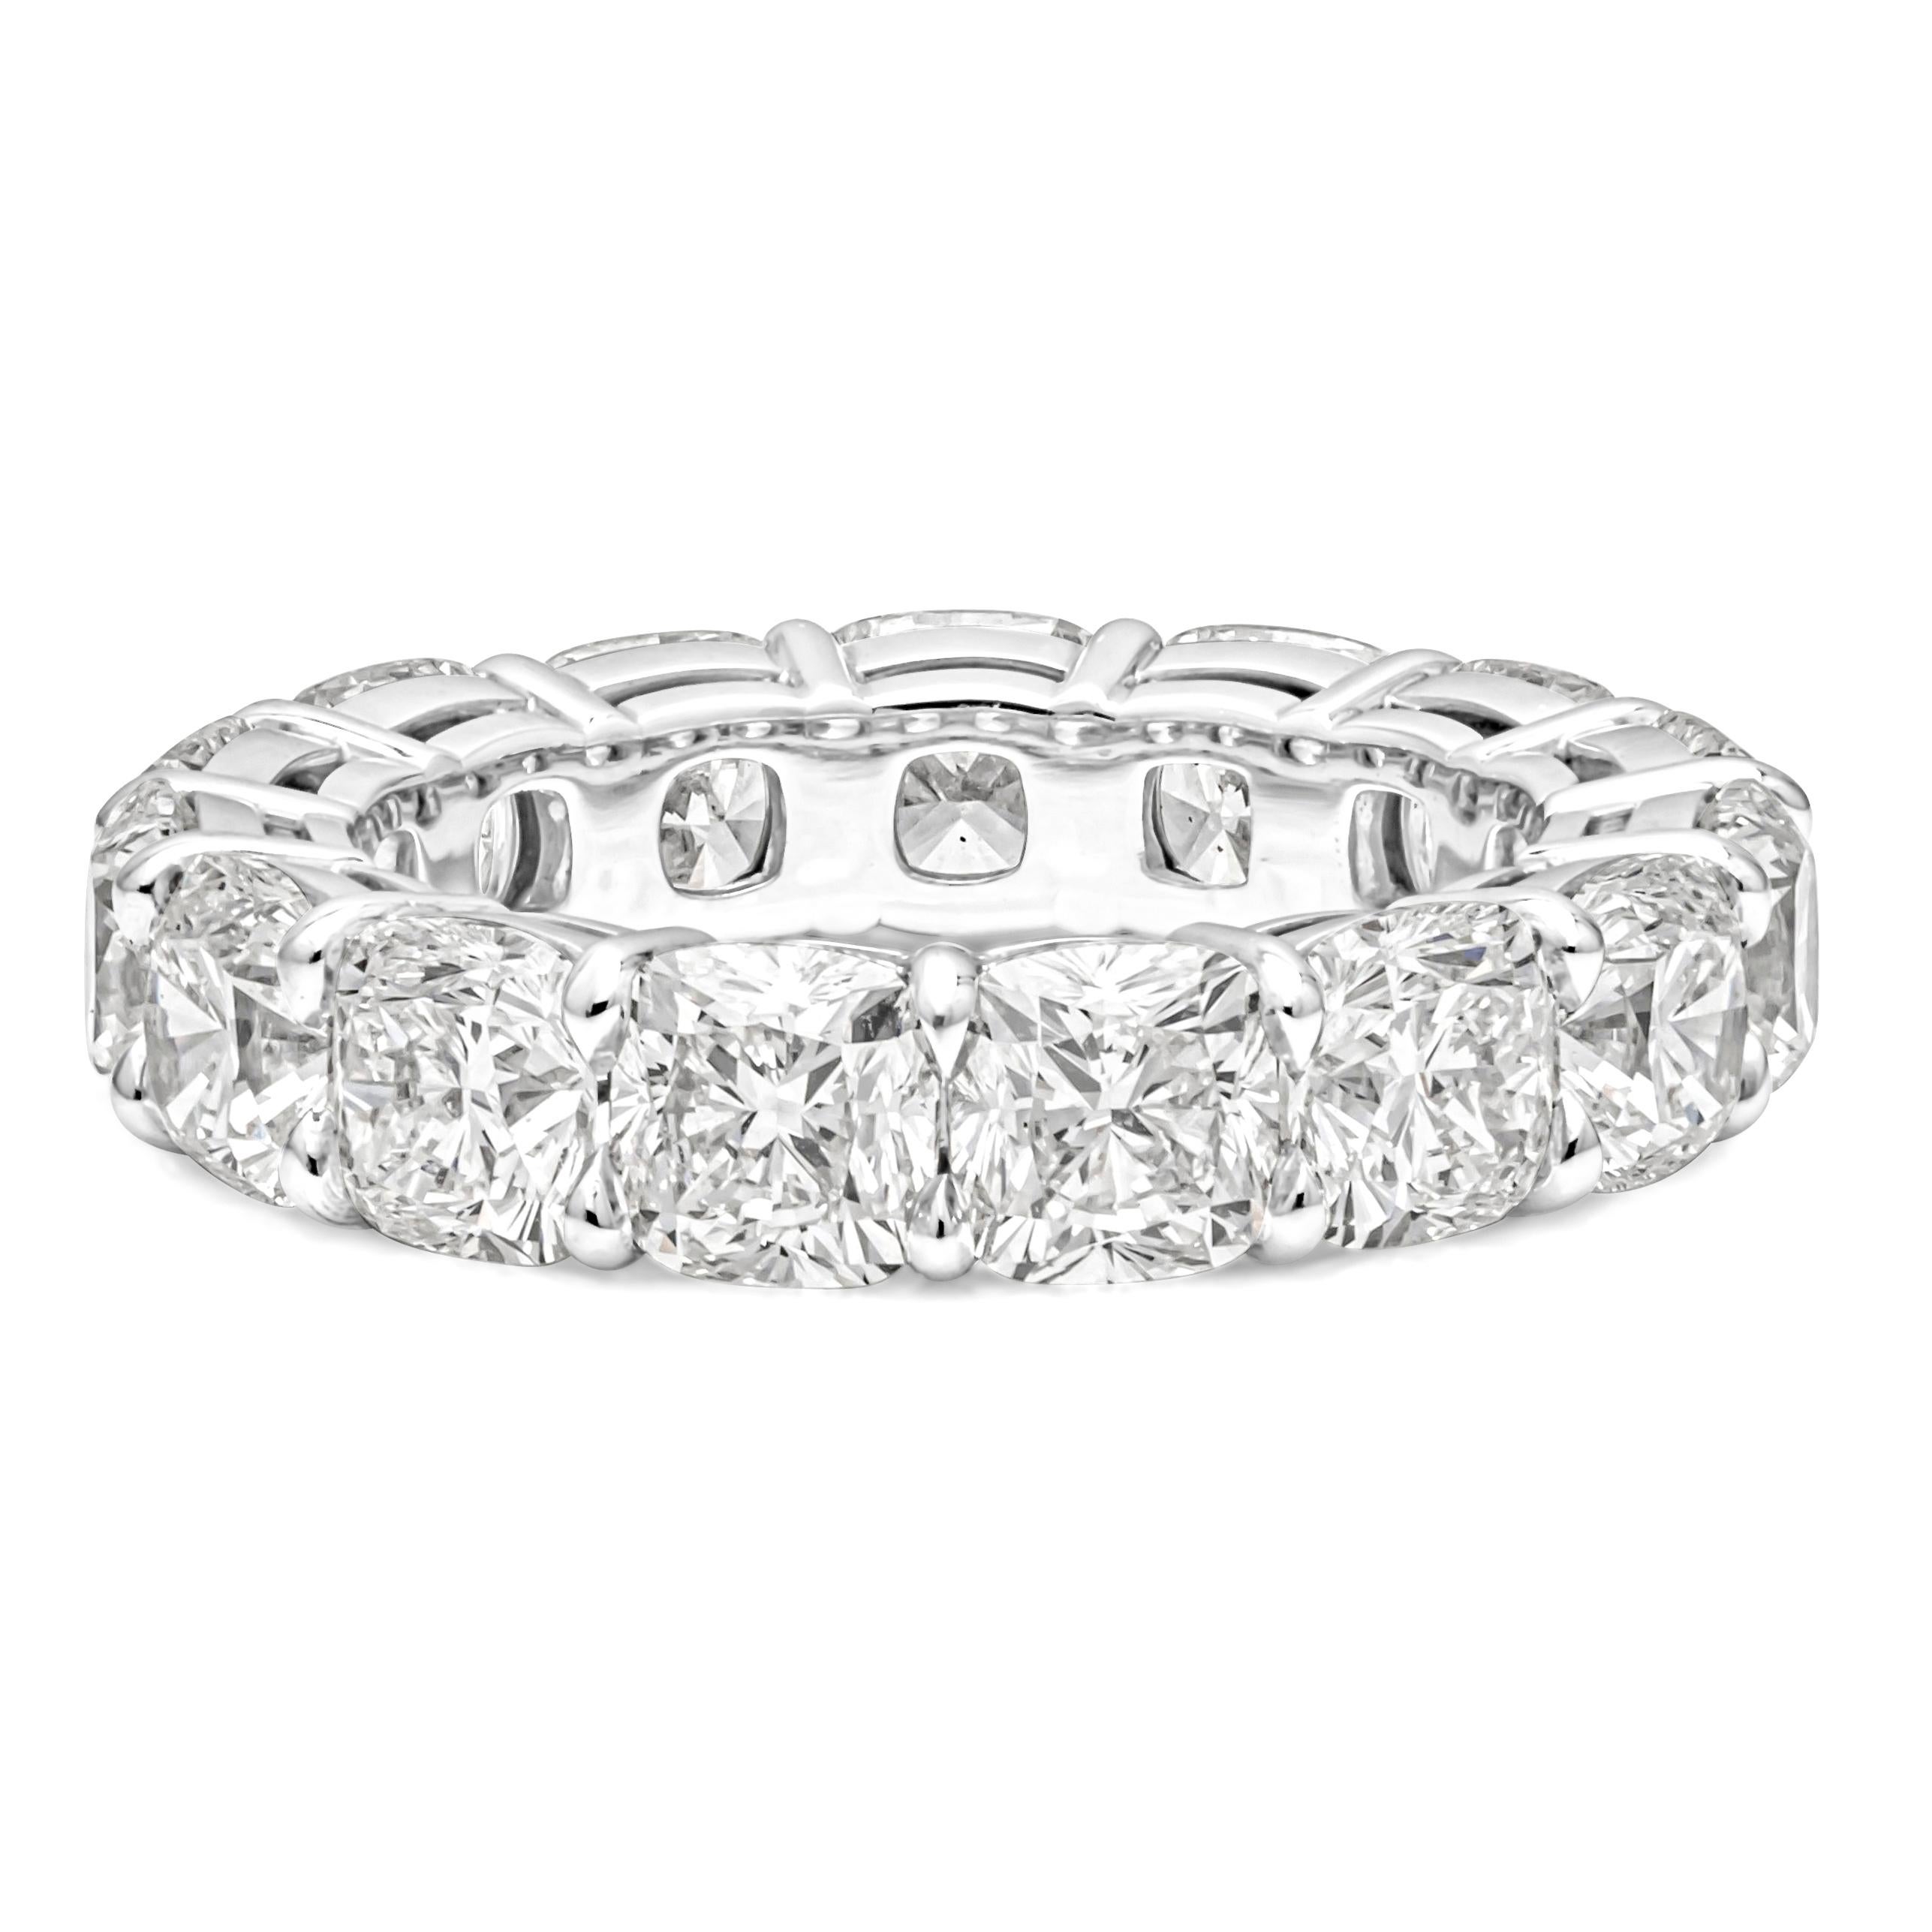 A brilliant diamond eternity wedding band showcasing 15 GIA Certified 7.64 carats total cushion cut diamonds, J Color and VS1-VVS in Clarity, set in a classic shared prong setting. Finely made in a Platinum and Size 6.25 US resizable upon request